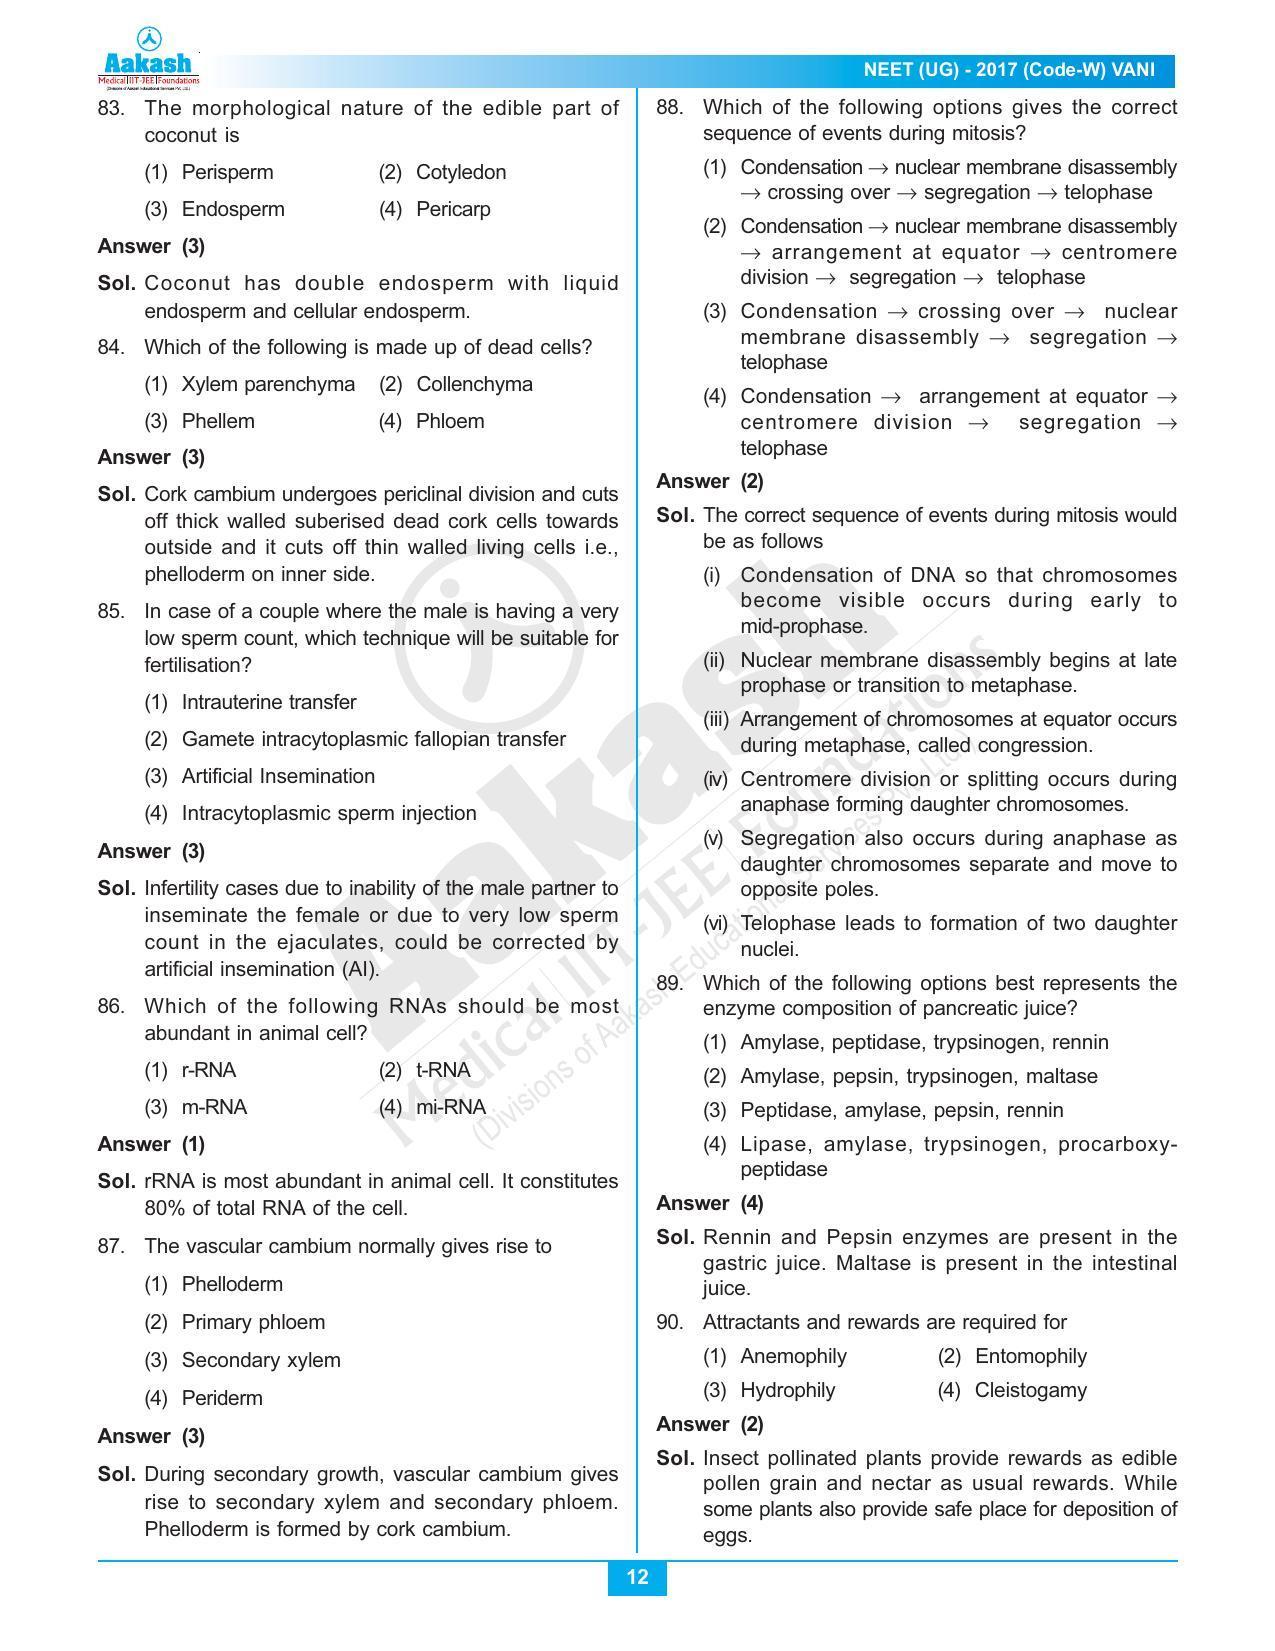  NEET Code W 2017 Answer & Solutions - Page 12